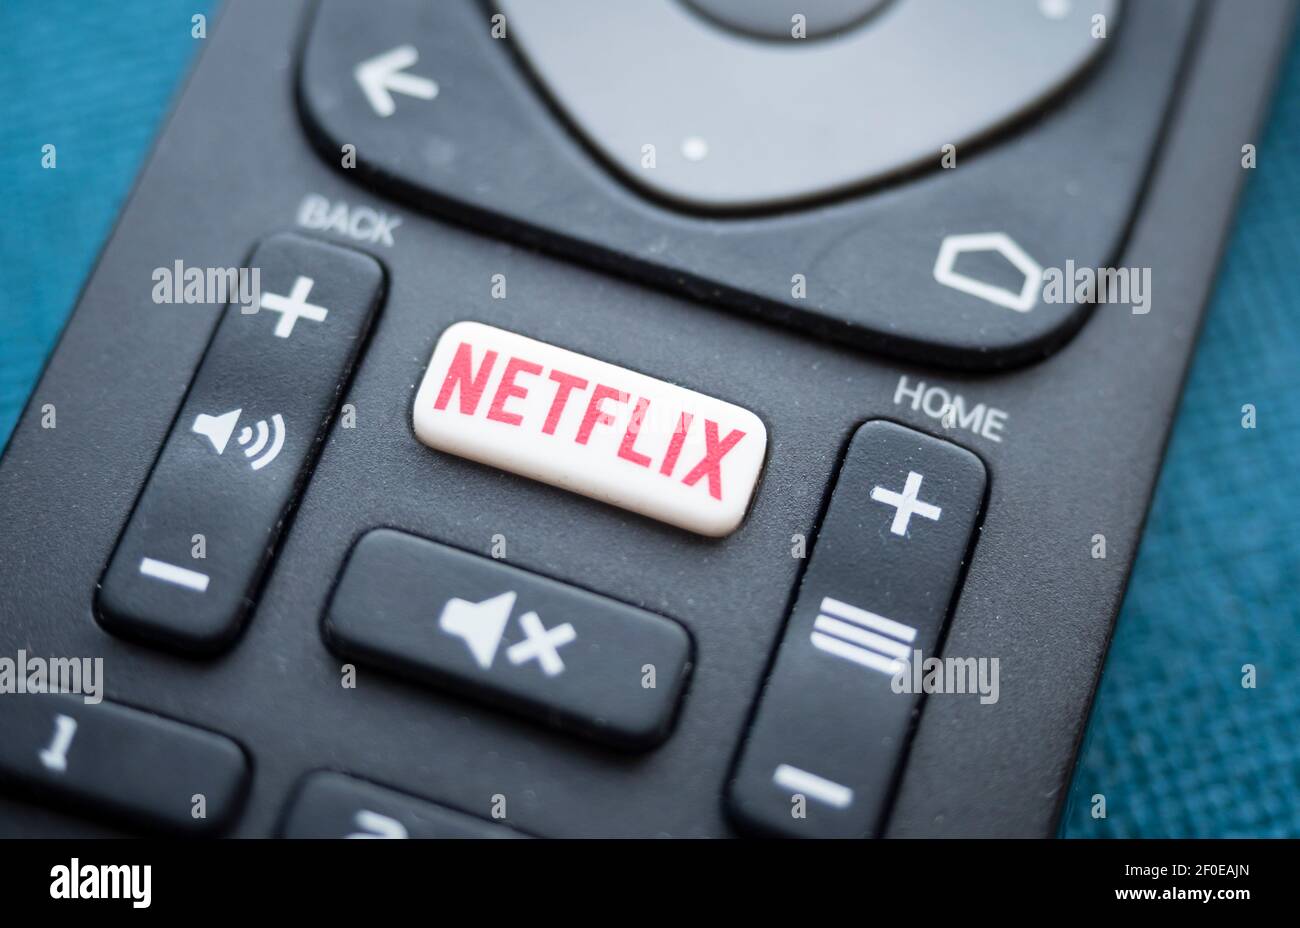 Close-up of the Netflix logo on the button of a TV remote control Stock Photo